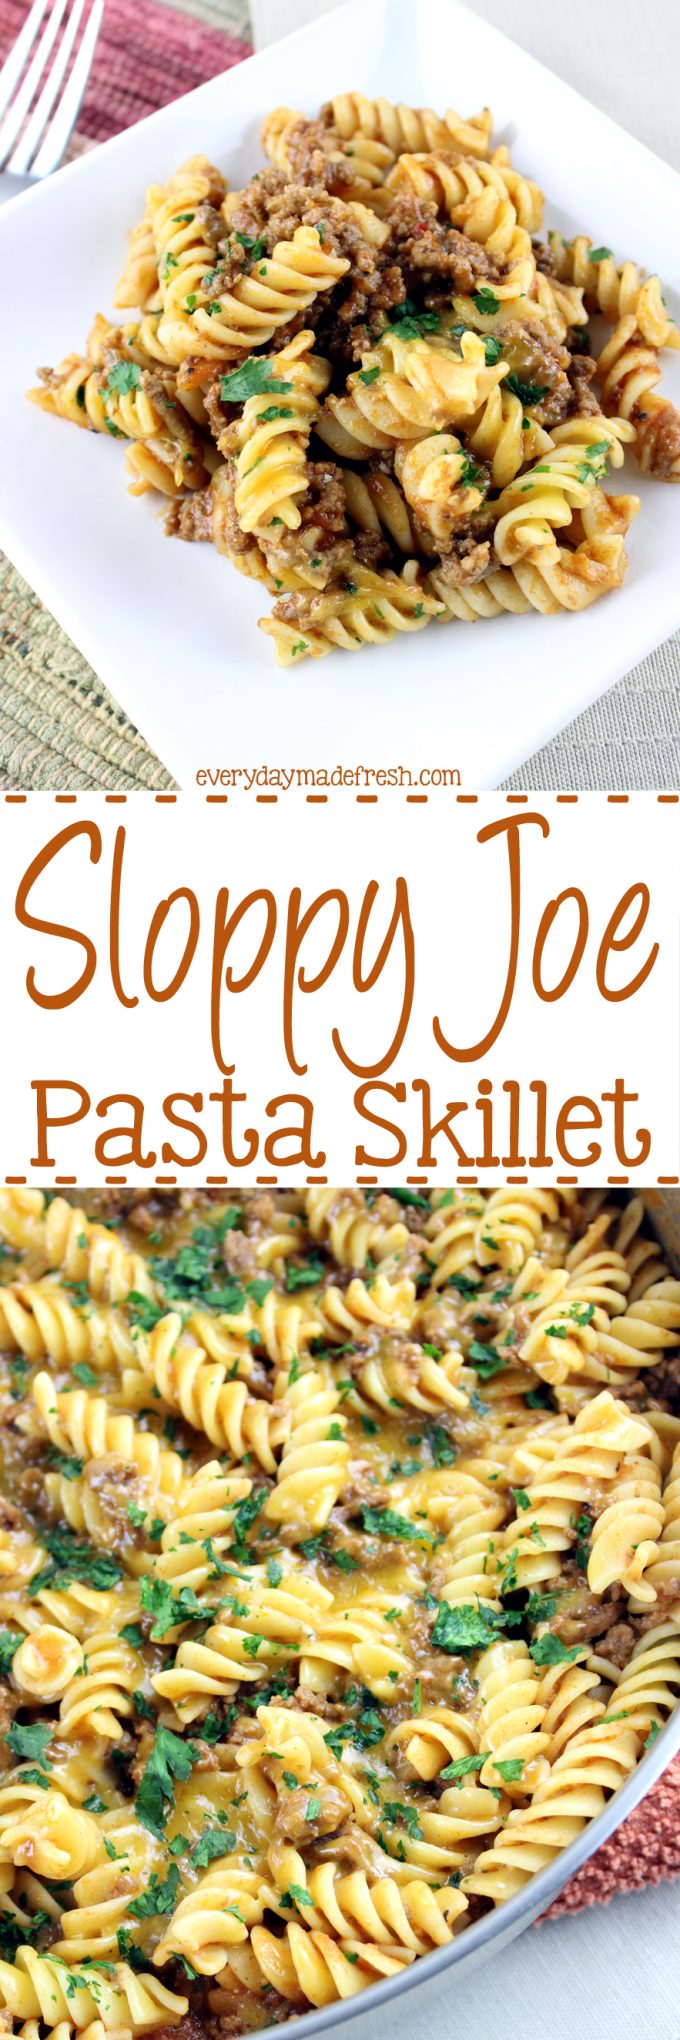 This Sloppy Joe Pasta Skillet is savory, comforting, and oh so tasty! Homemade sloppy joe sauce mixed with pasta, and topped with cheddar cheese; sure to satisfy any kid! | EverydayMadeFresh.com